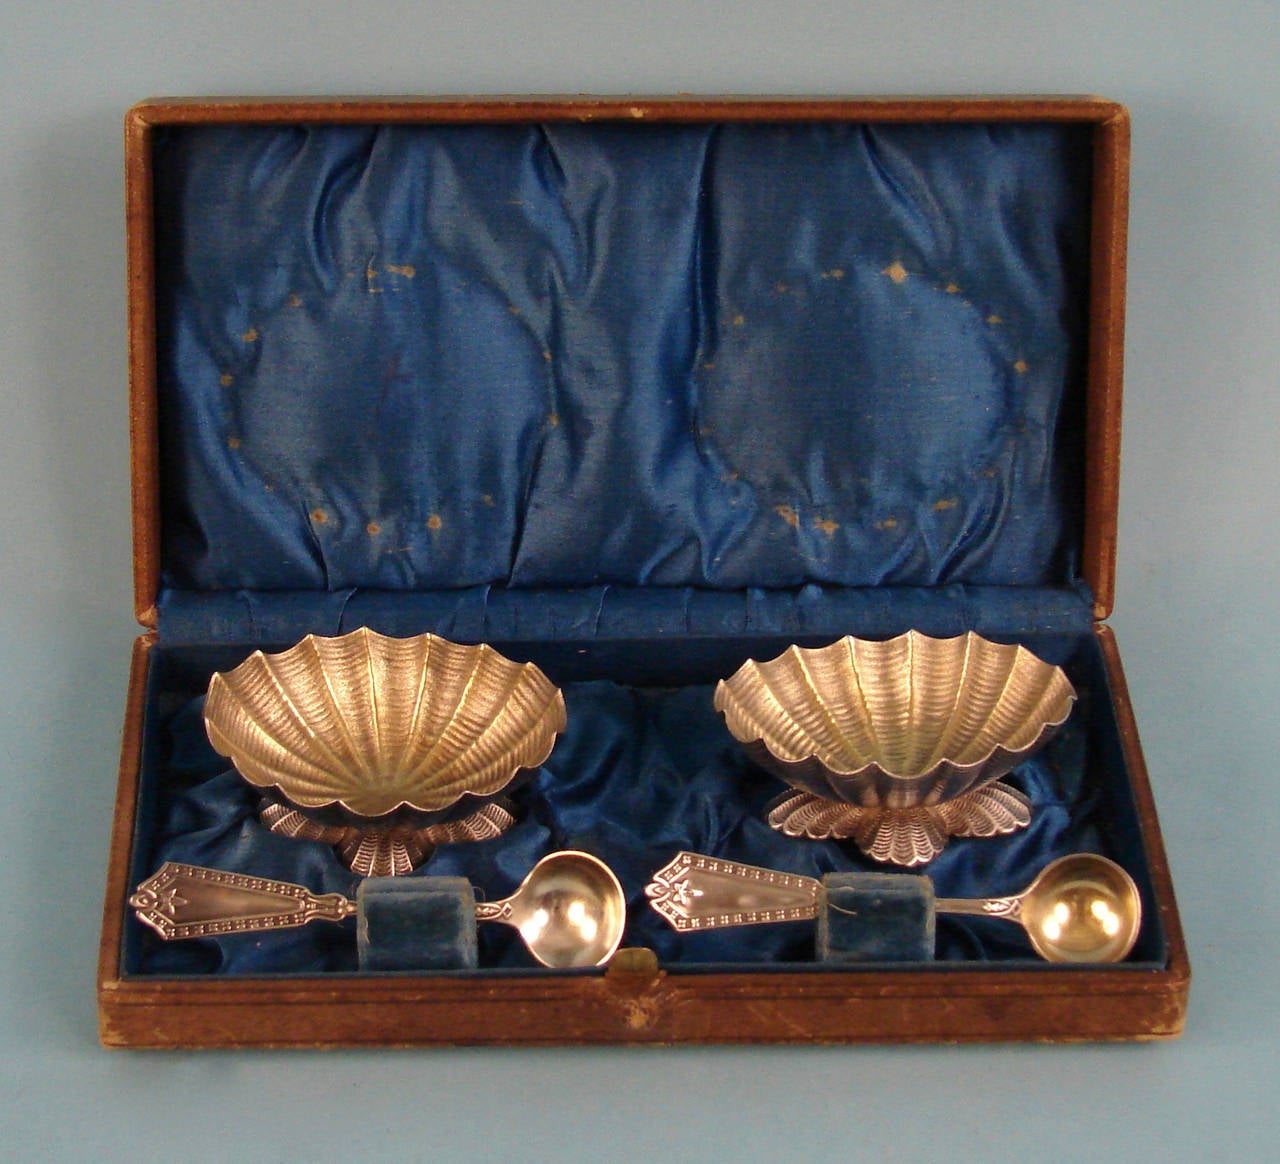 A pair of American late 19th century cast silver gilt open salts (with spoons) in the form of clam shells, made by the Frank Whiting Company retaining their original leather satin lined case. Marked 